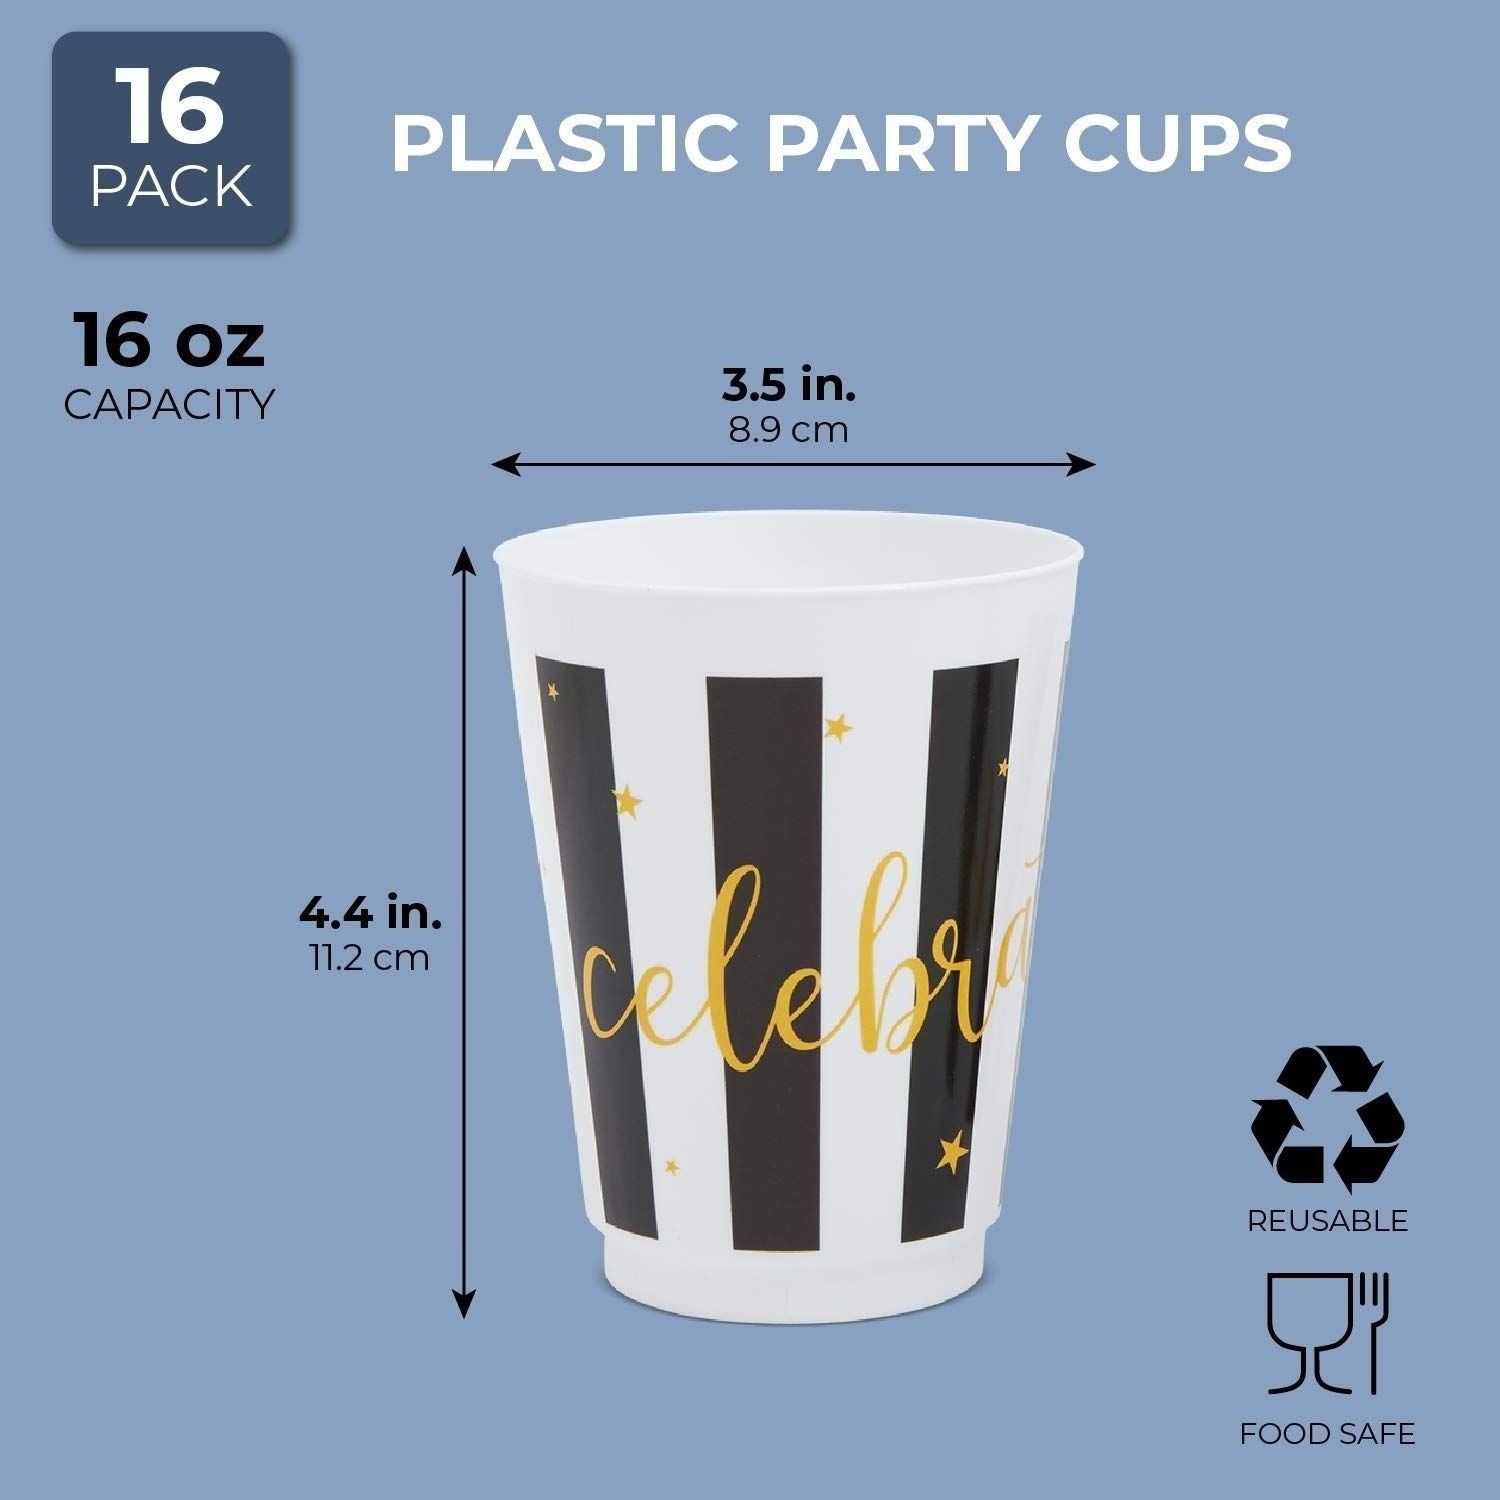 https://ak1.ostkcdn.com/images/products/31094344/16x-Plastic-16-oz-Party-Cups-Celebrate-Reusable-Tumblers-for-Birthday-Baby-Shower-Graduation-Wedding-Parties-Black-and-White-1a0ccb67-4961-42b4-91d0-4d31a830fa61.jpg